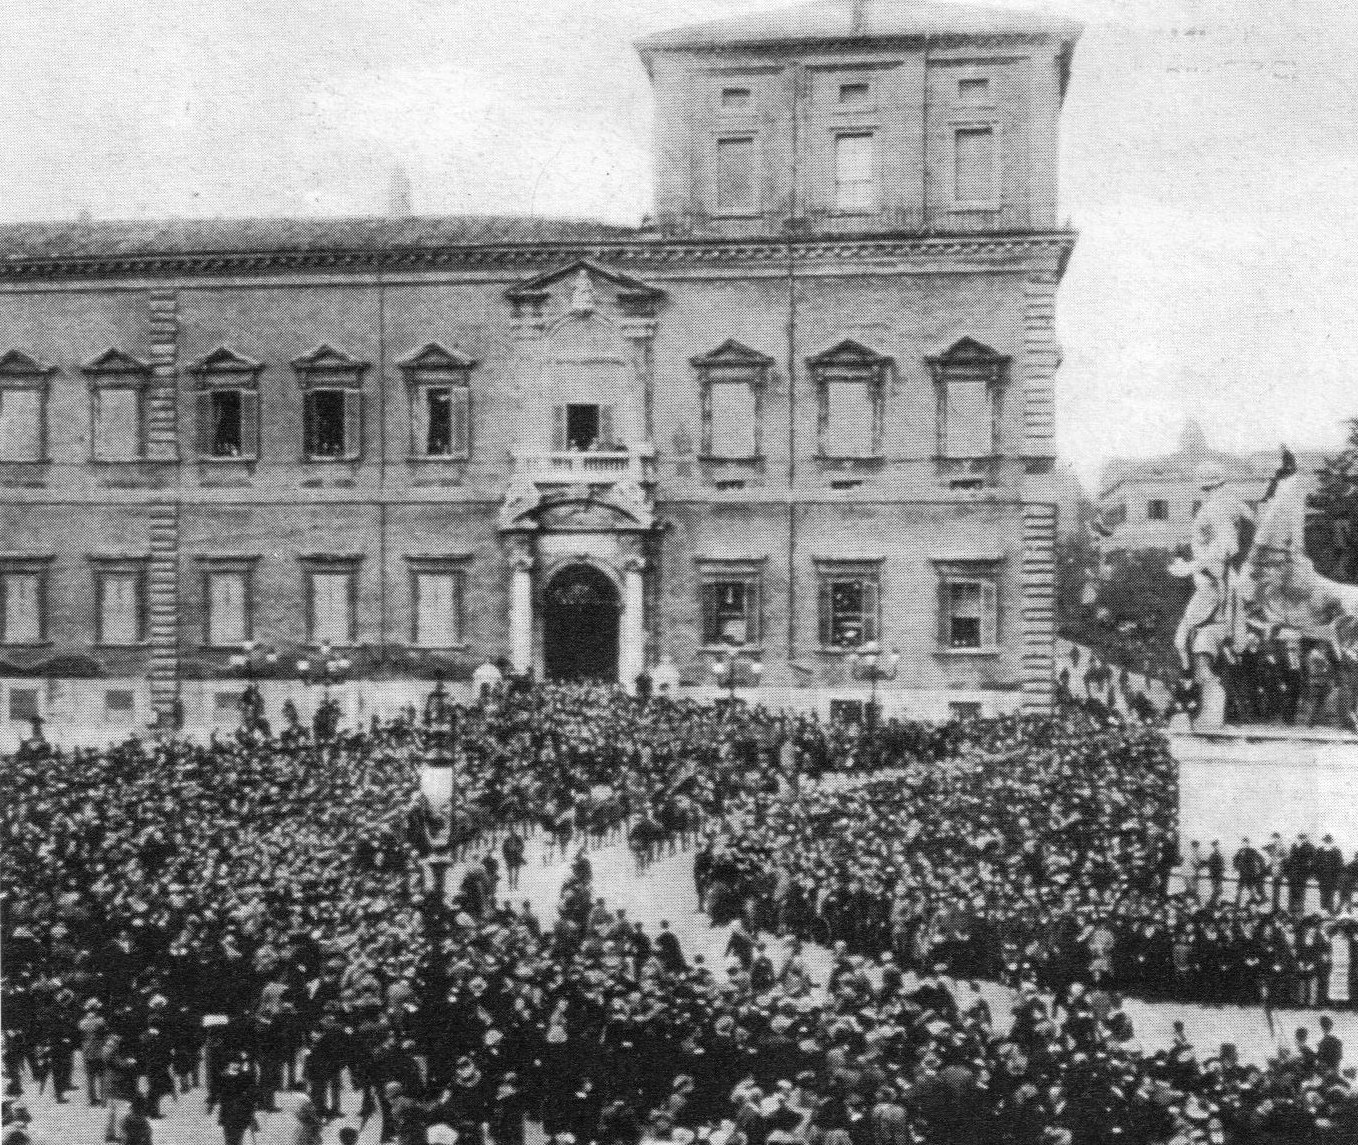 Fascists parading near the residence of the king of Italy